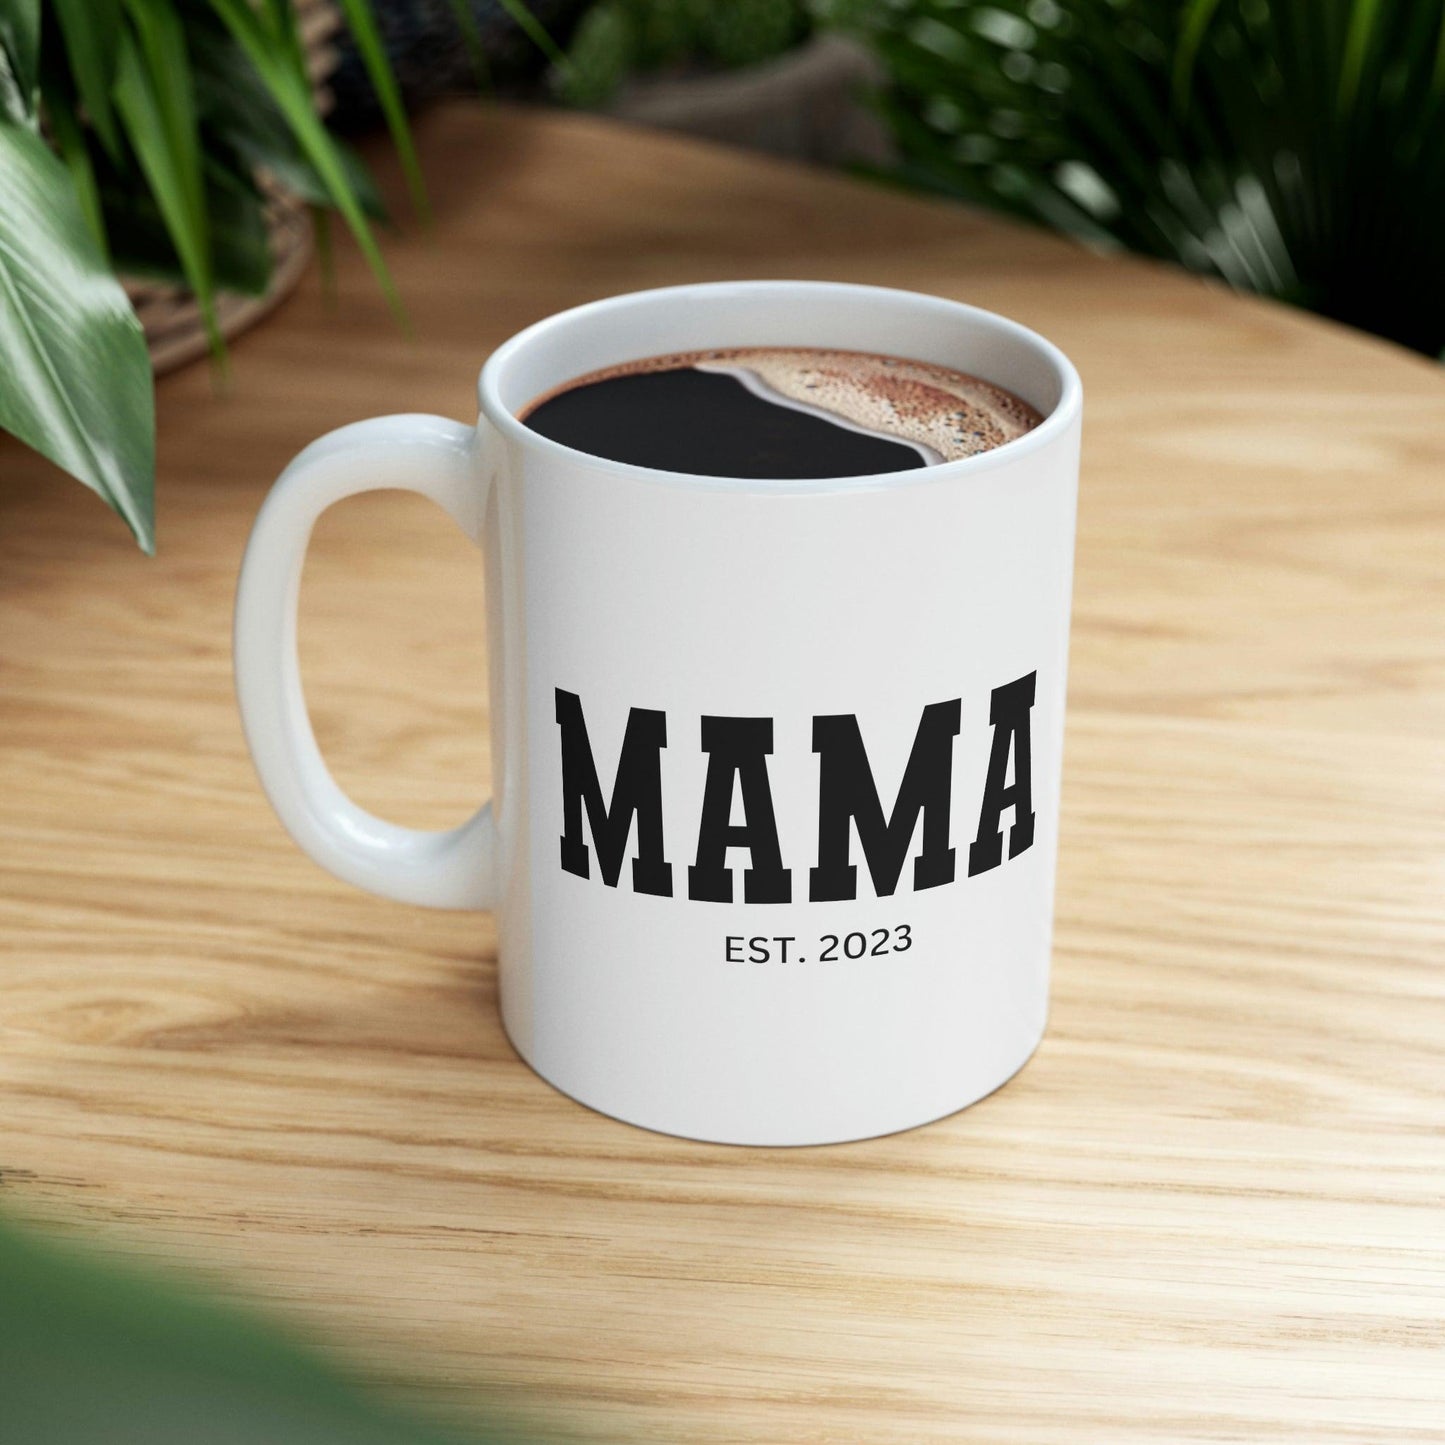 Best Mama Ever Mug, gift for mom on mothers day, Birthday gift for mom, gift for her, coffee mug for her, hot cocoa mug, gift for coffee lover - Giftsmojo